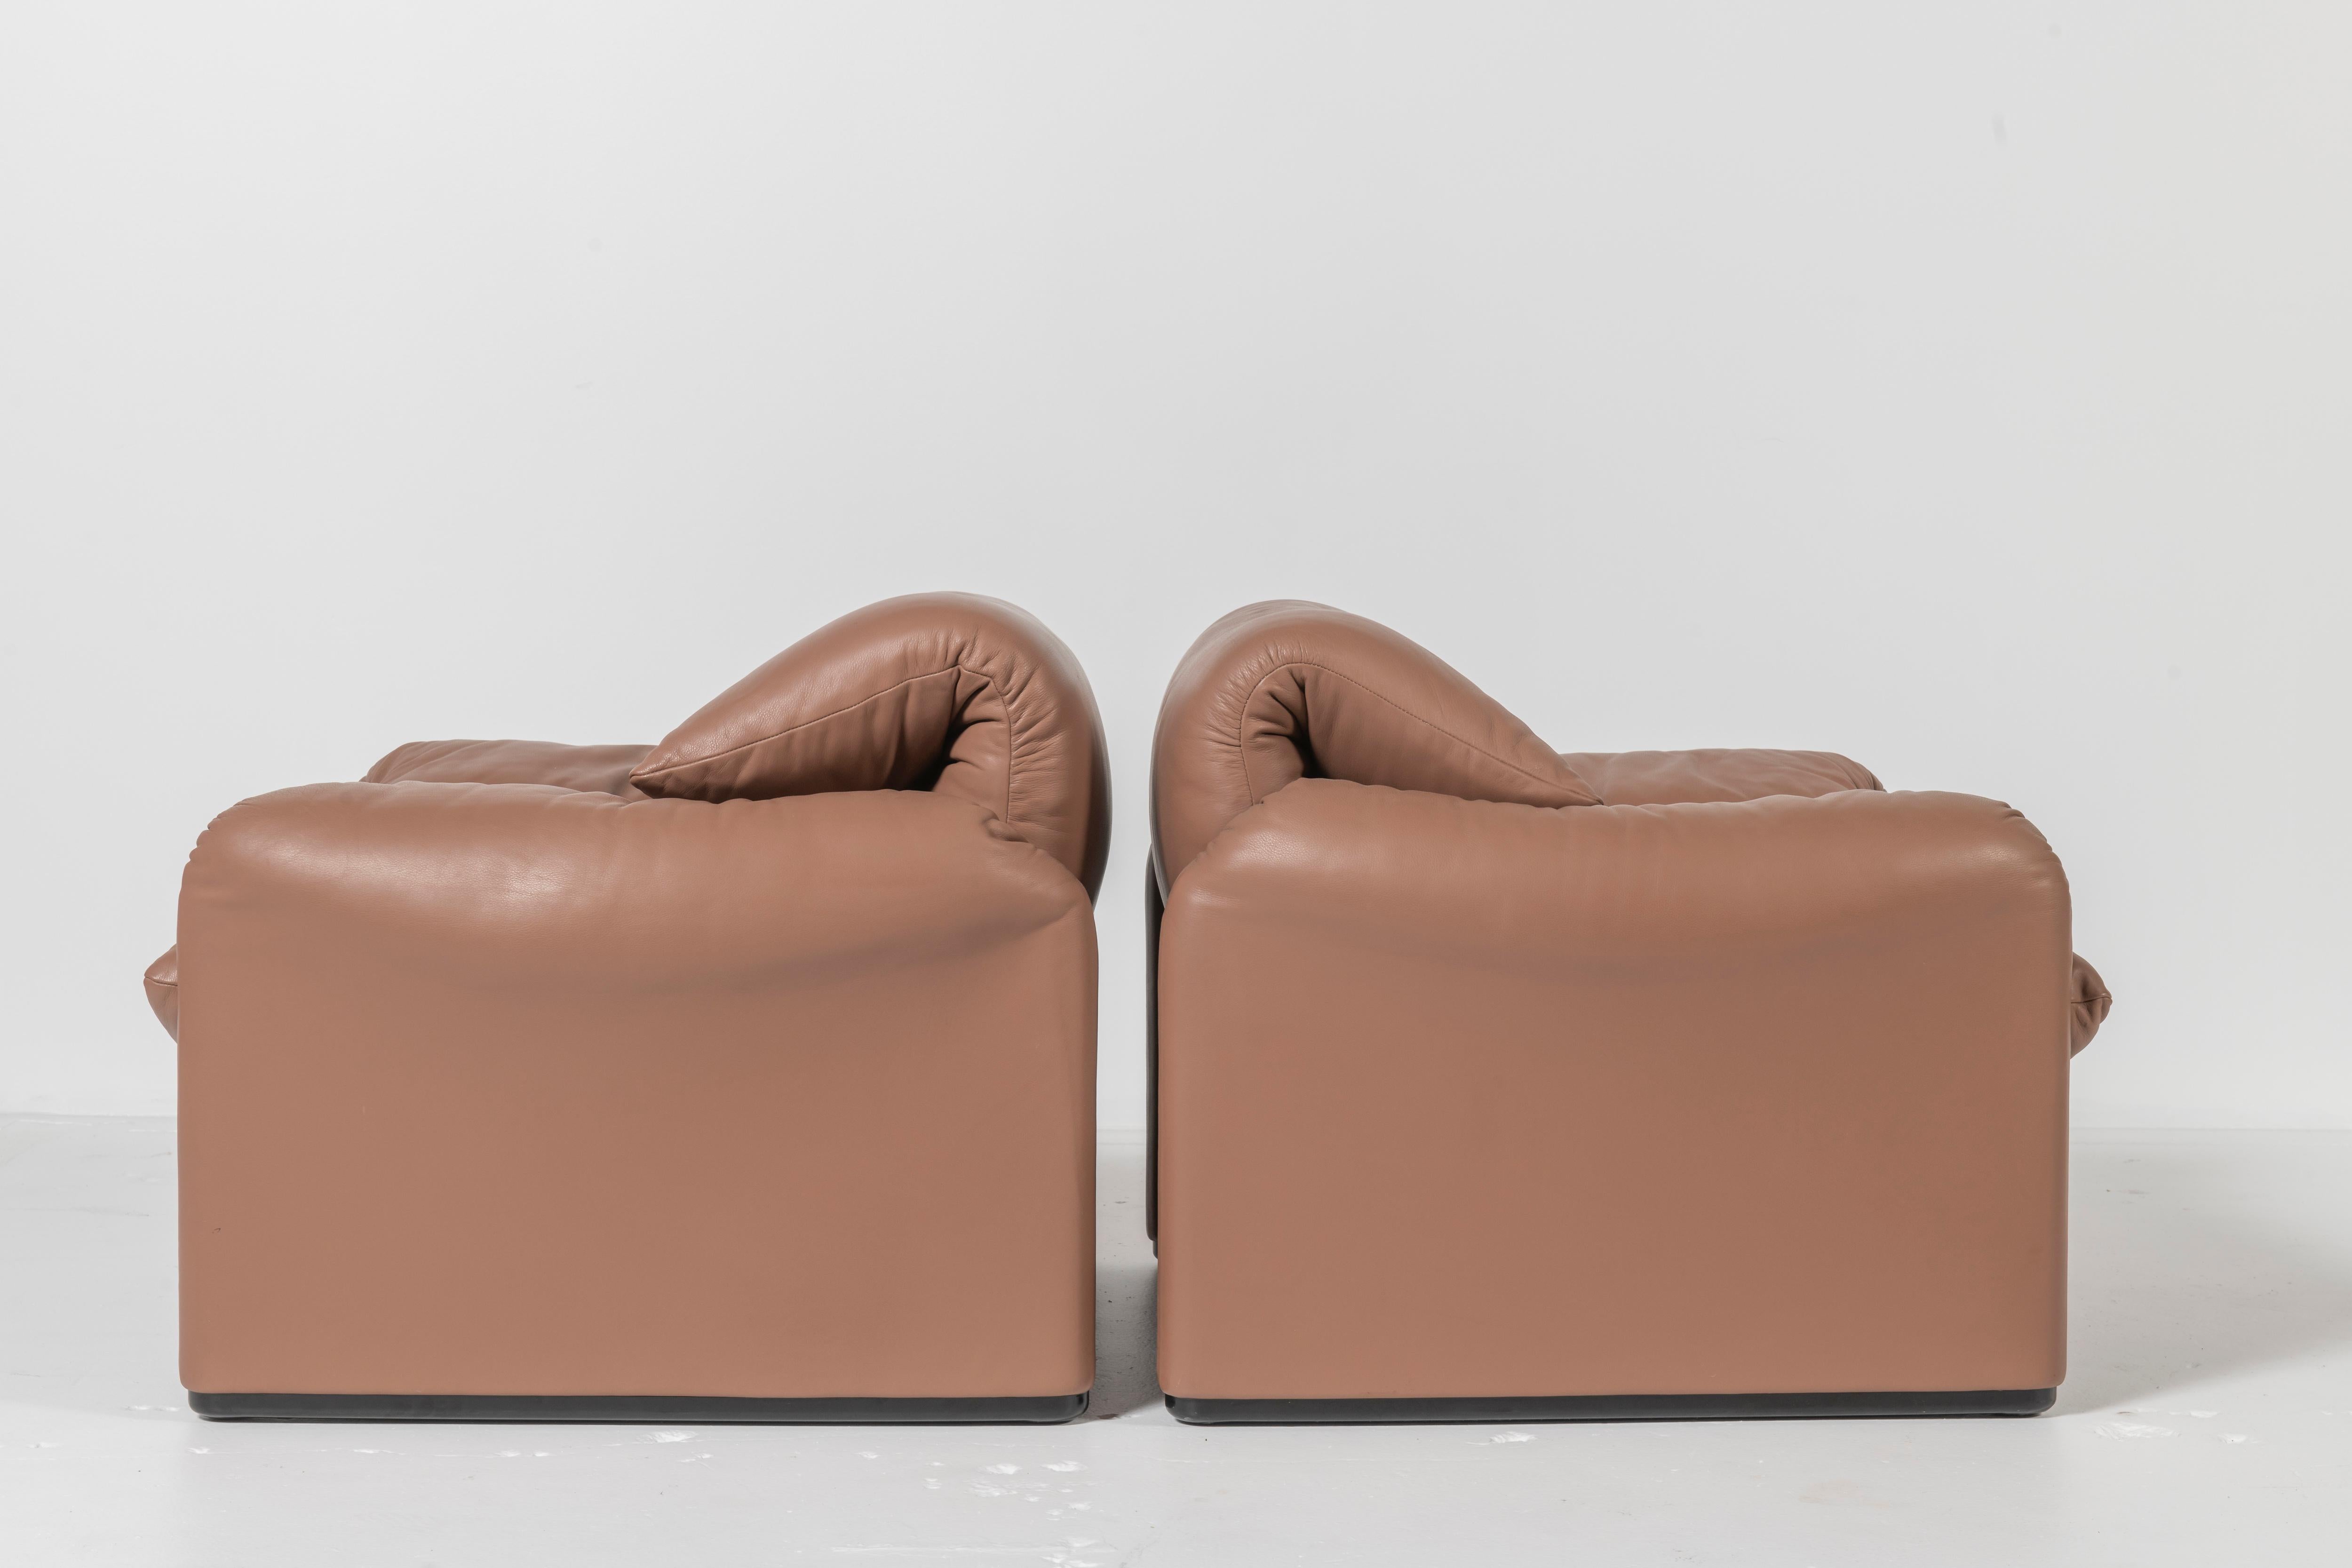 Pair of Maralunga Lounge Chairs with Ottoman in Tan Leather by Cassina 4